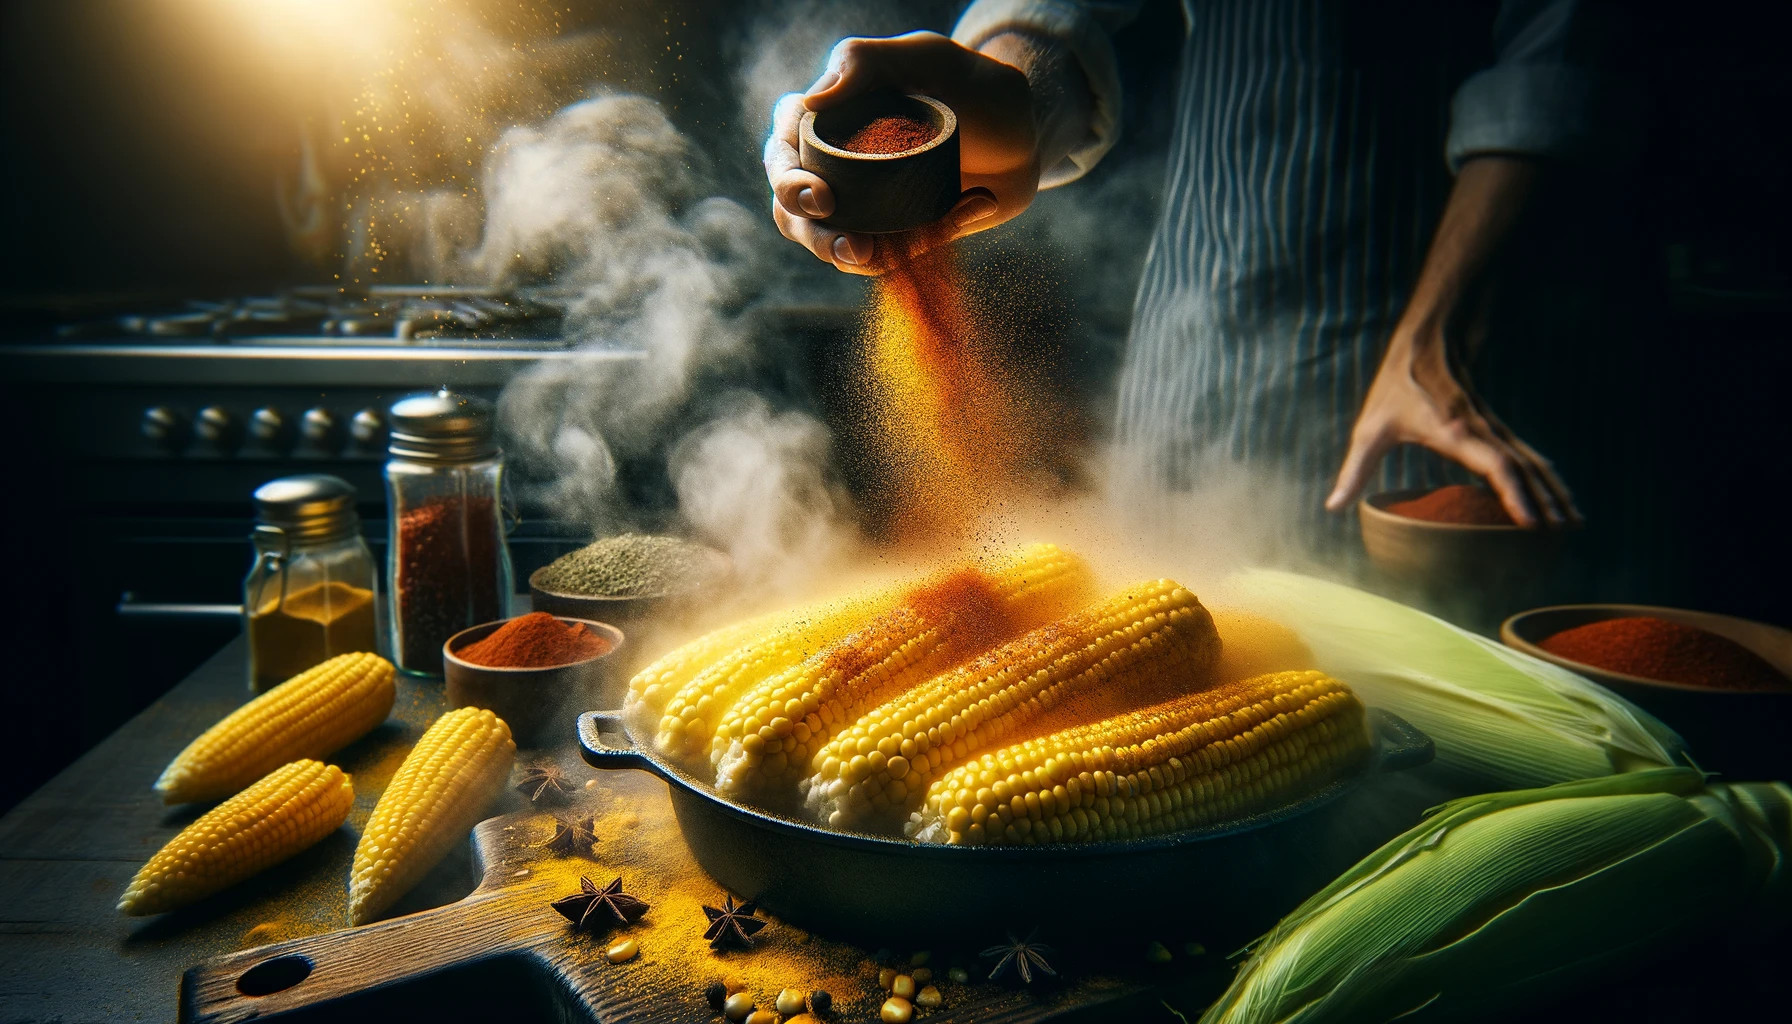 A dynamic, action shot of someone shaking spices over boiling corn on the cob.